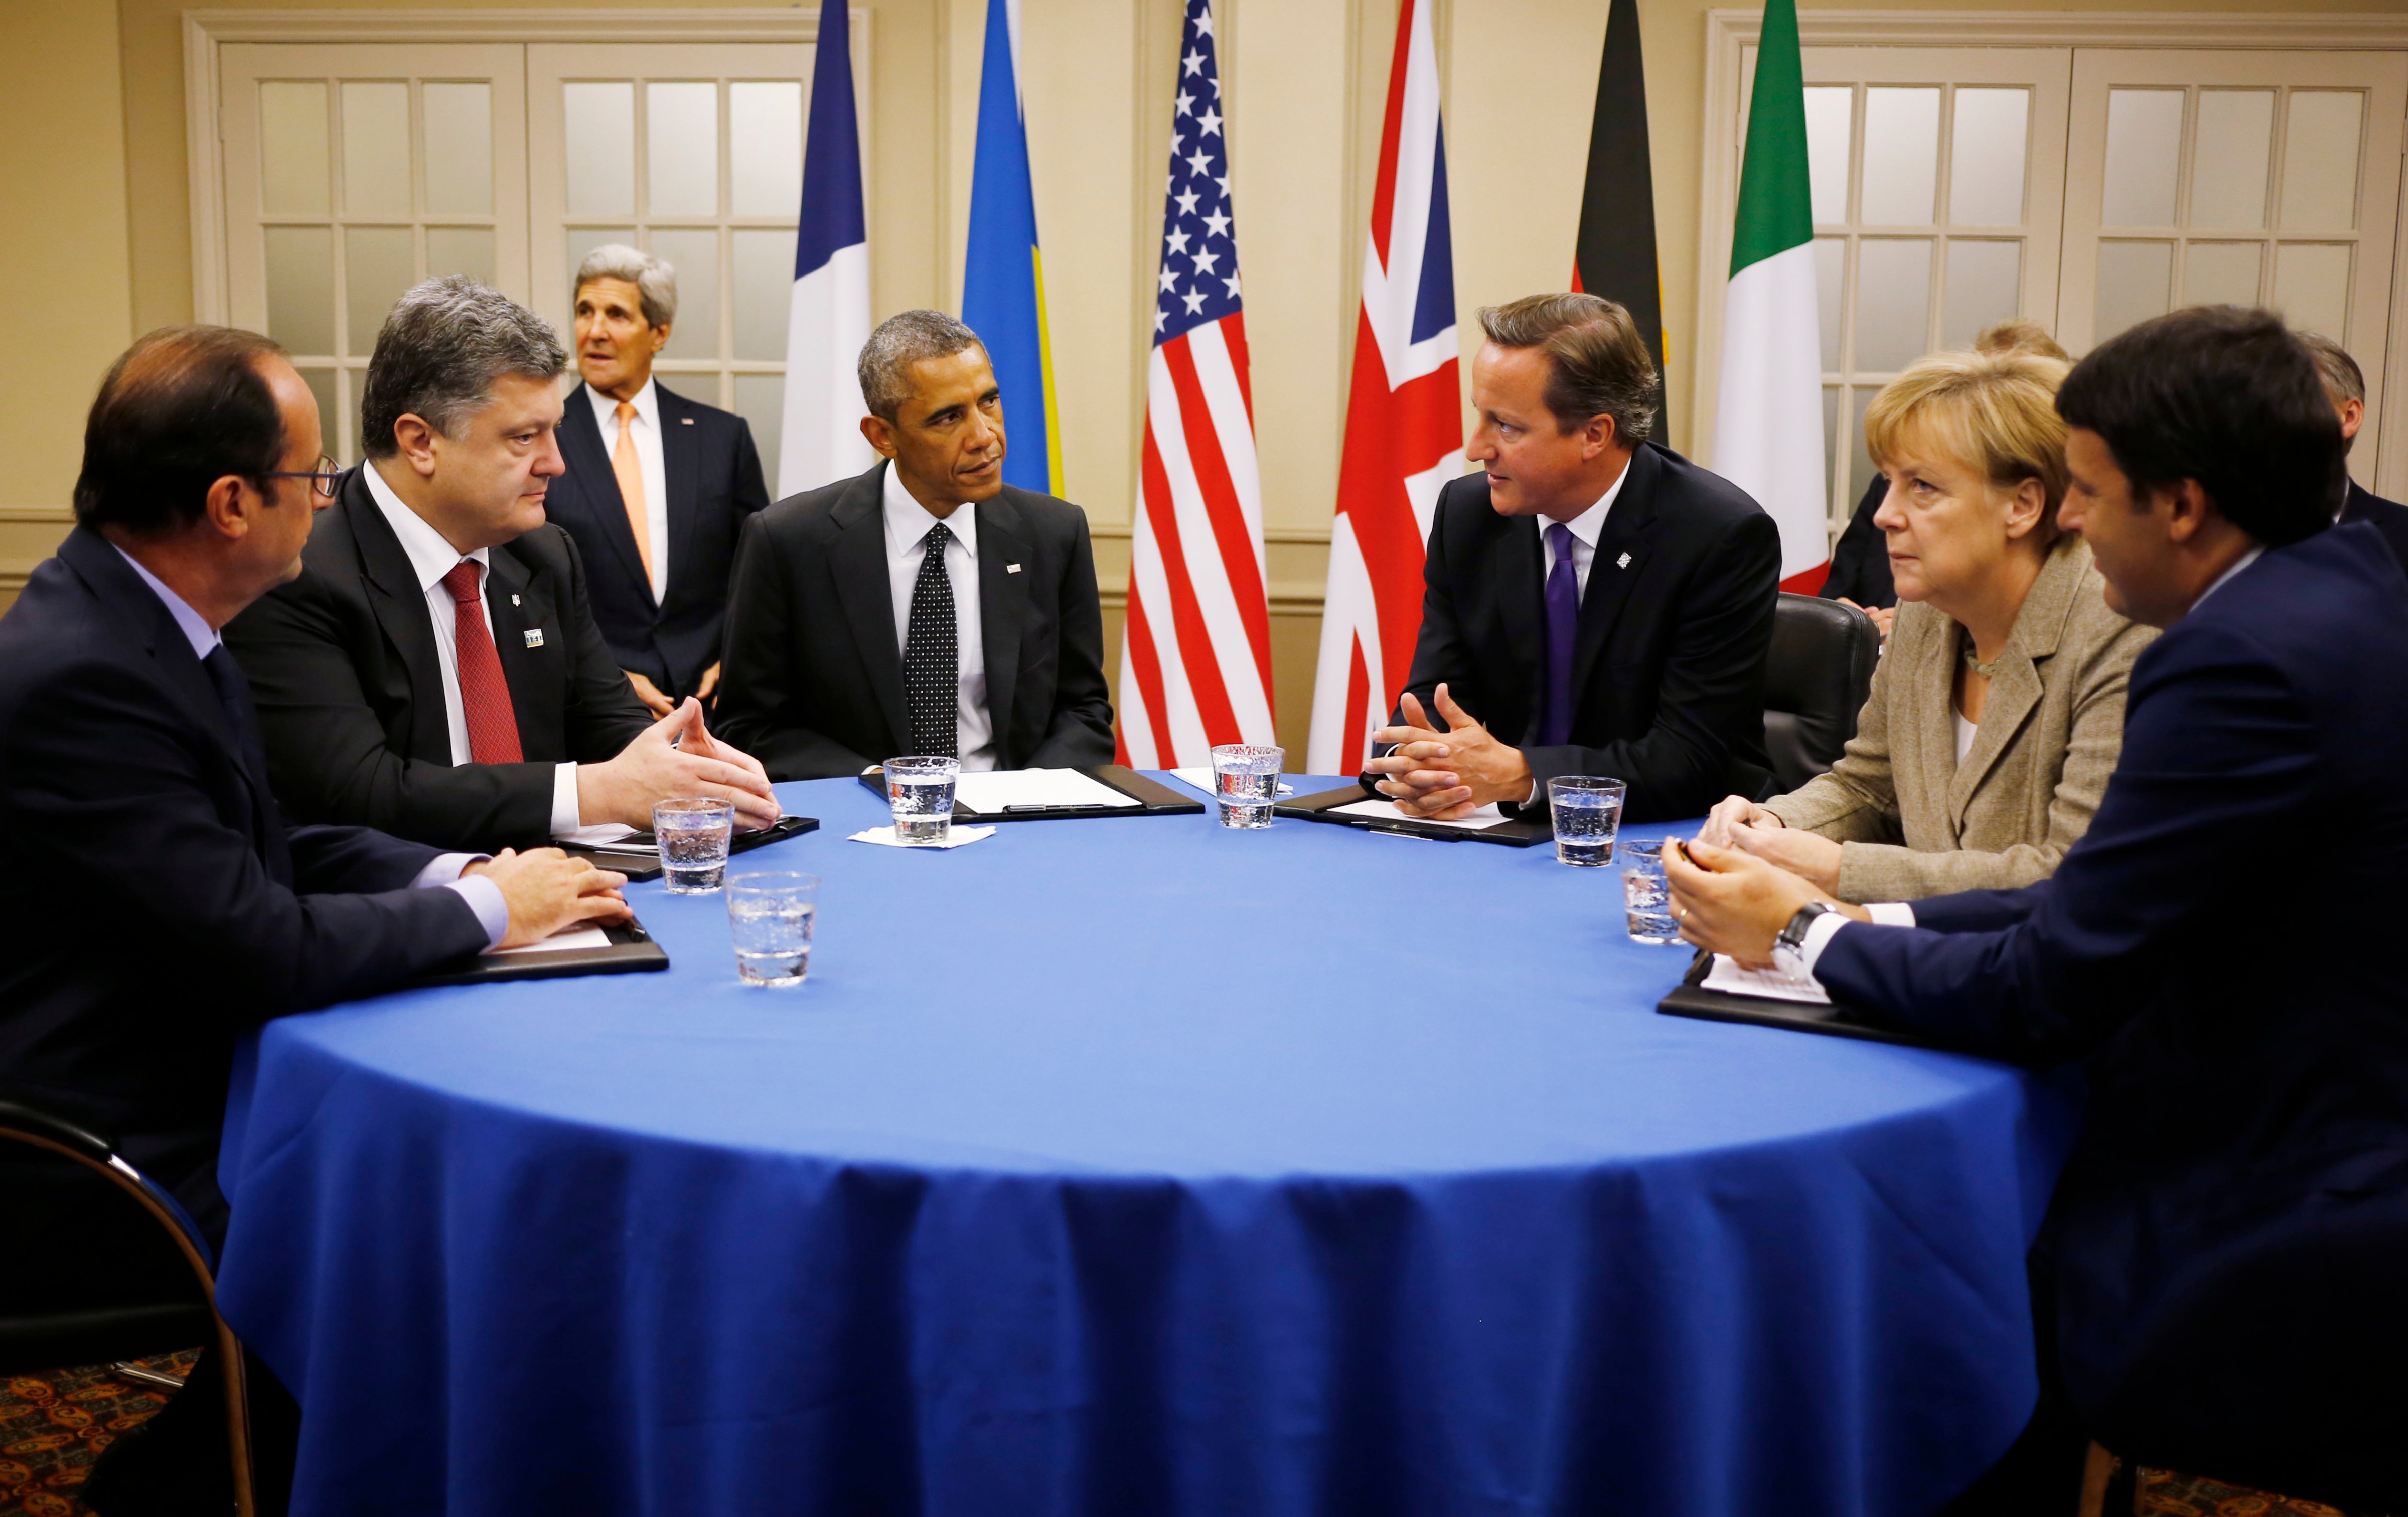 U.S. President Barack Obama is seated at a table with, from left to right: France's President Francois Hollande; Ukraine President Petro Poroshenko; British Prime Minister David Cameron; German Chancellor Angela Merkel; and Italian Prime Minister Matteo Renzi as they meet about Ukraine at the NATO summit at Celtic Manor in Newport, Wales, Thursday, Sept. 4, 2014.